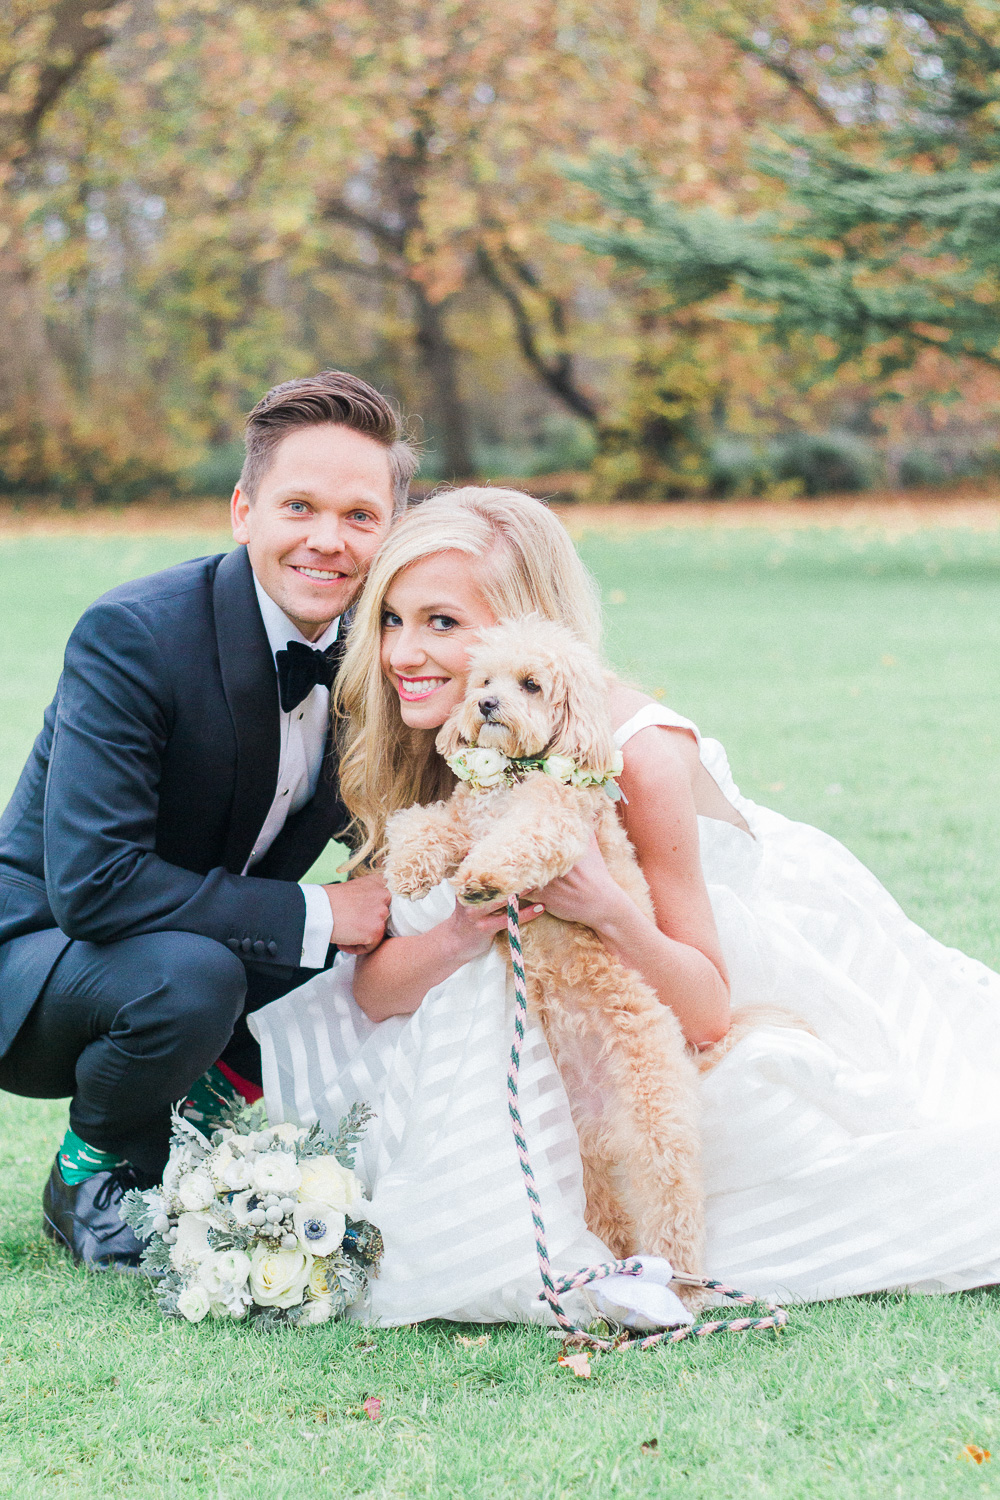 Portrait of the bride, groom and their mini french poodle london wedding photographer Maxeen Kim